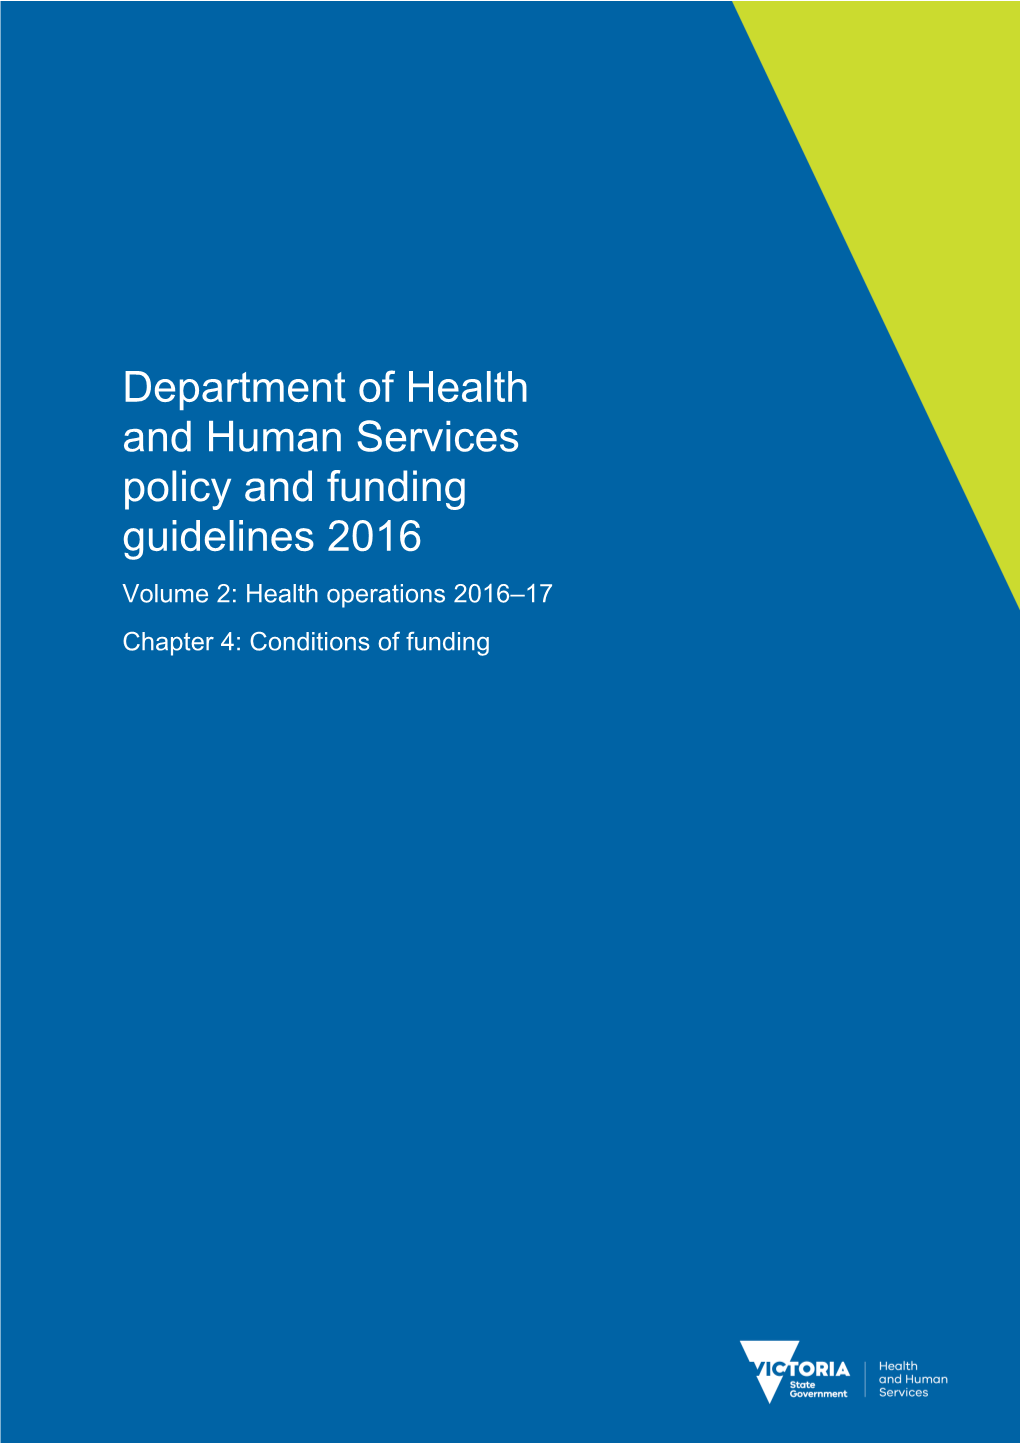 Department of Health and Human Services Policy and Funding Guidelines 2016 - Volume 2